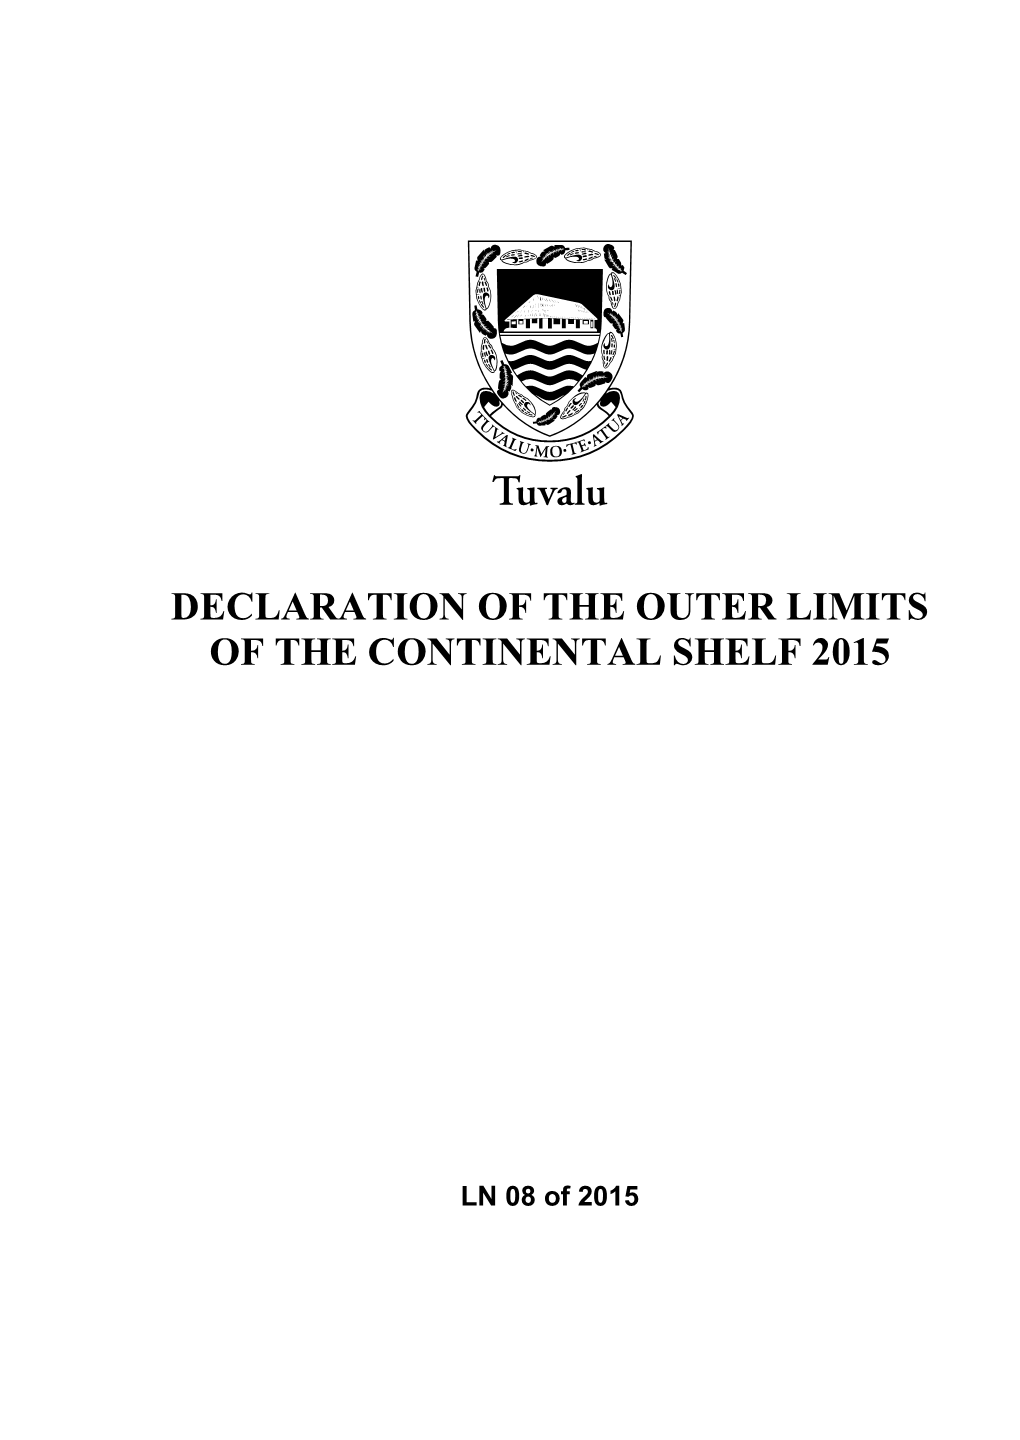 Declaration of the Outer Limits of the Continental Shelf 2015